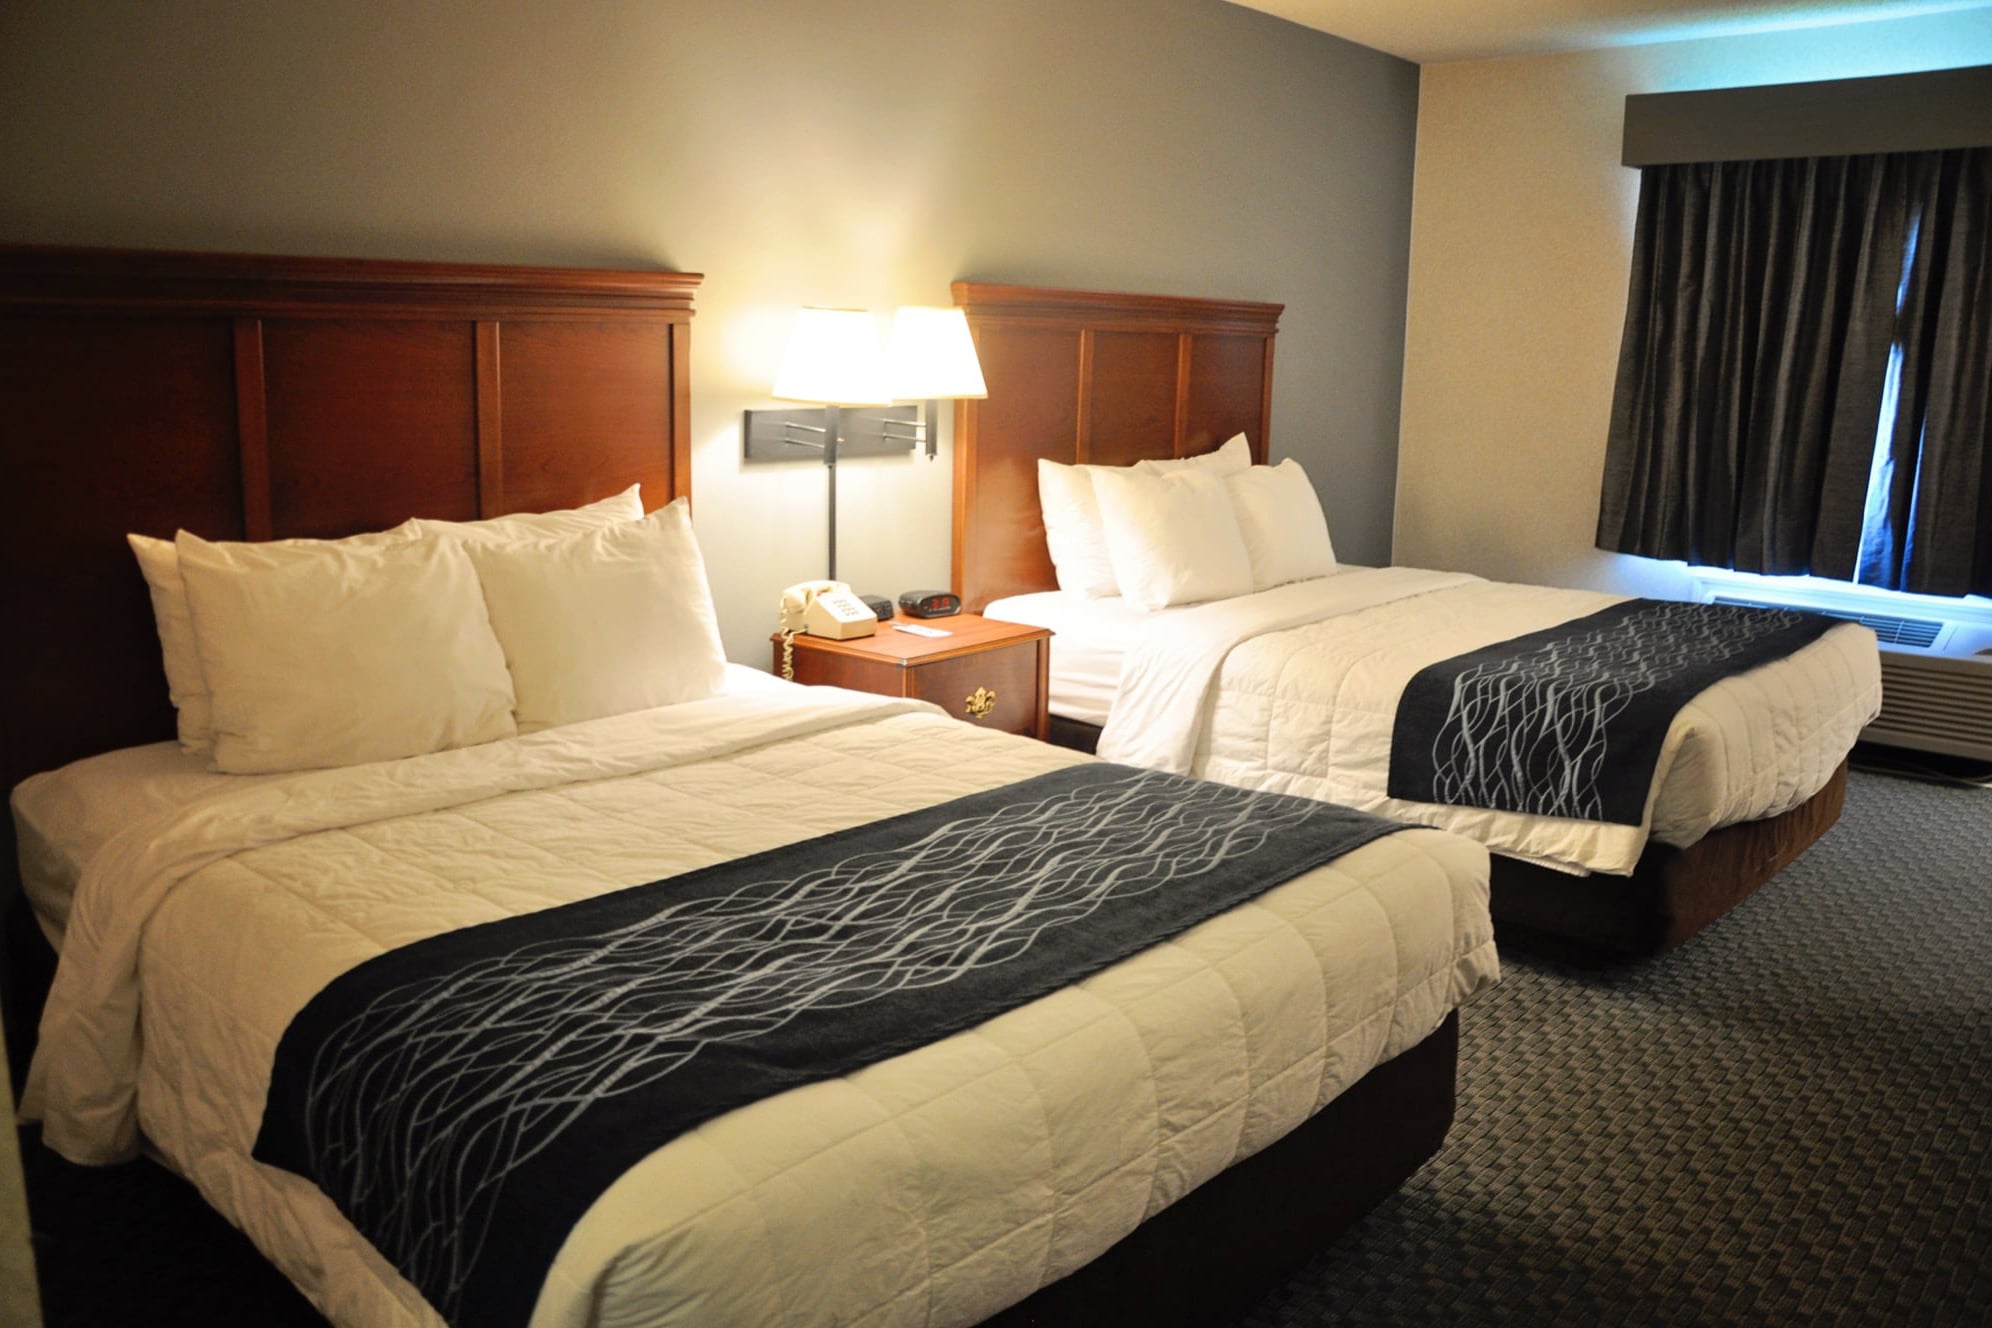 Our Standard room features 2 queen size beds with 4 comfy pillows on each bed, 2 firm and 2 soft so you can pick your favorite!